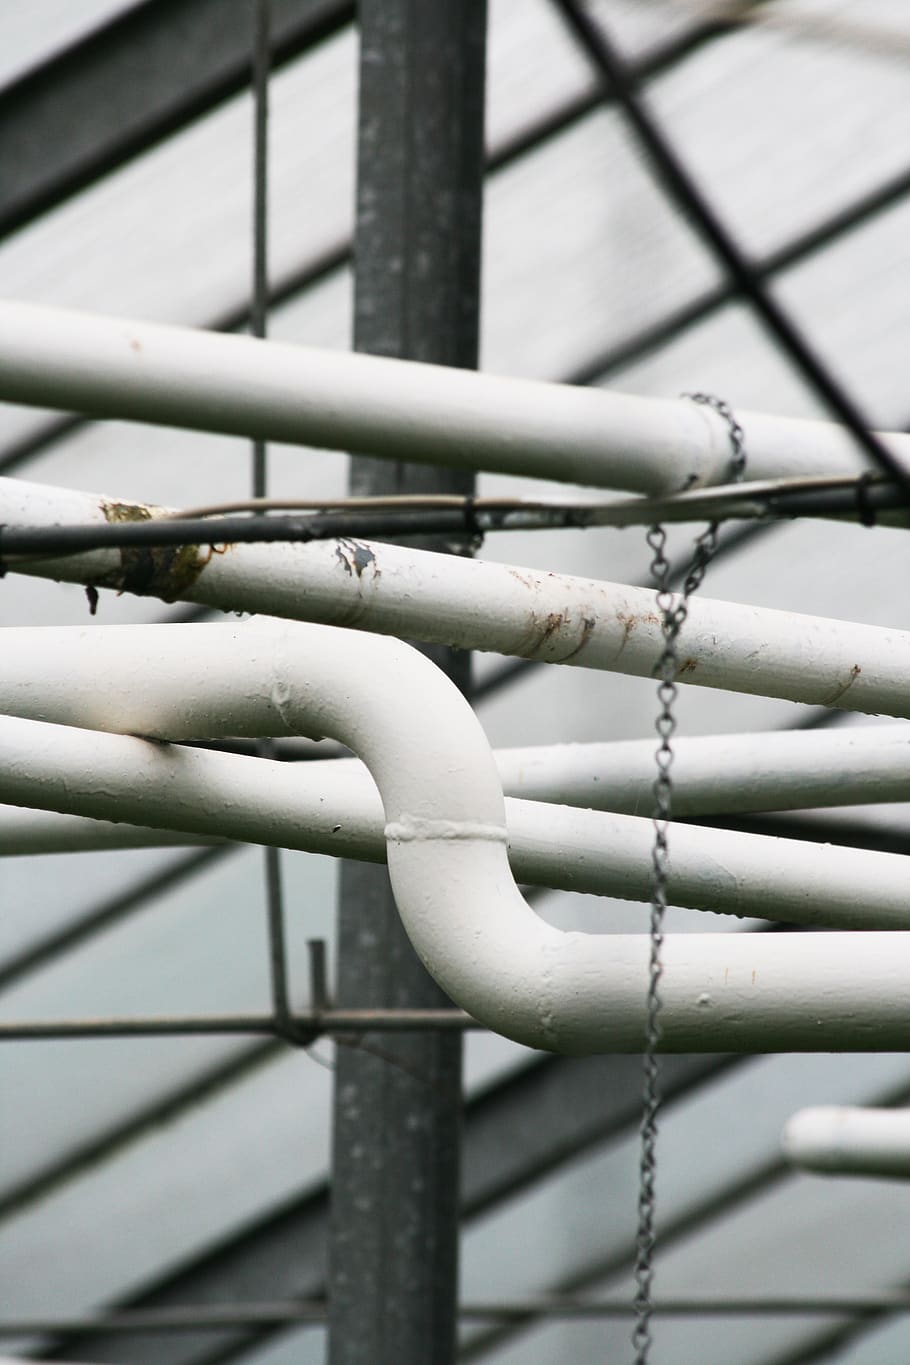 pipes, technology, metal, steel, greenhouse, day, focus on foreground, close-up, white color, pipe - tube